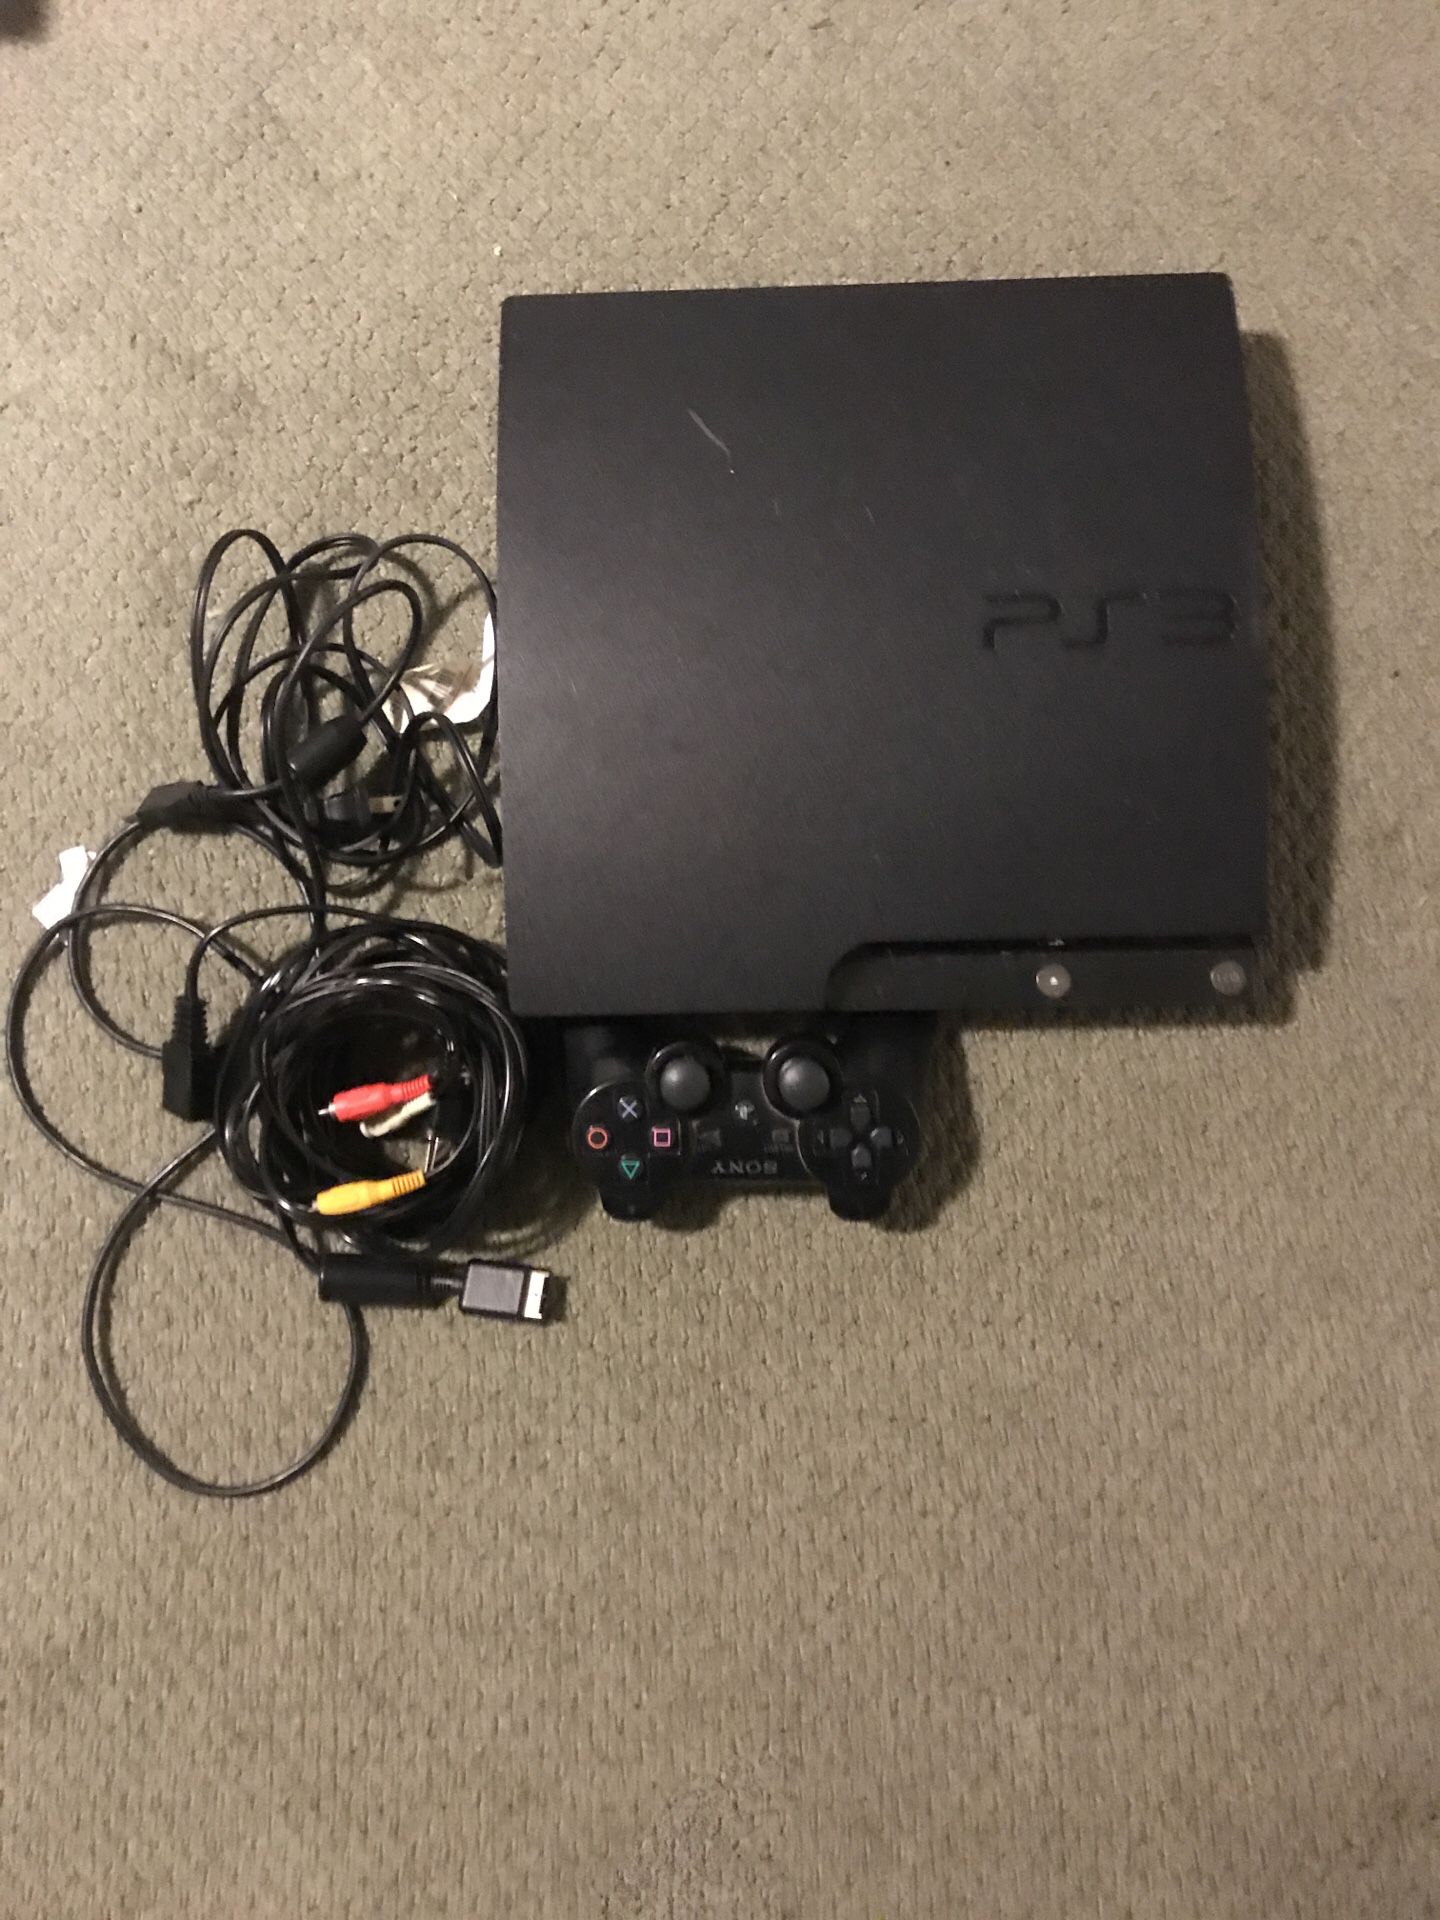 PS3 Slim All cords included and remote